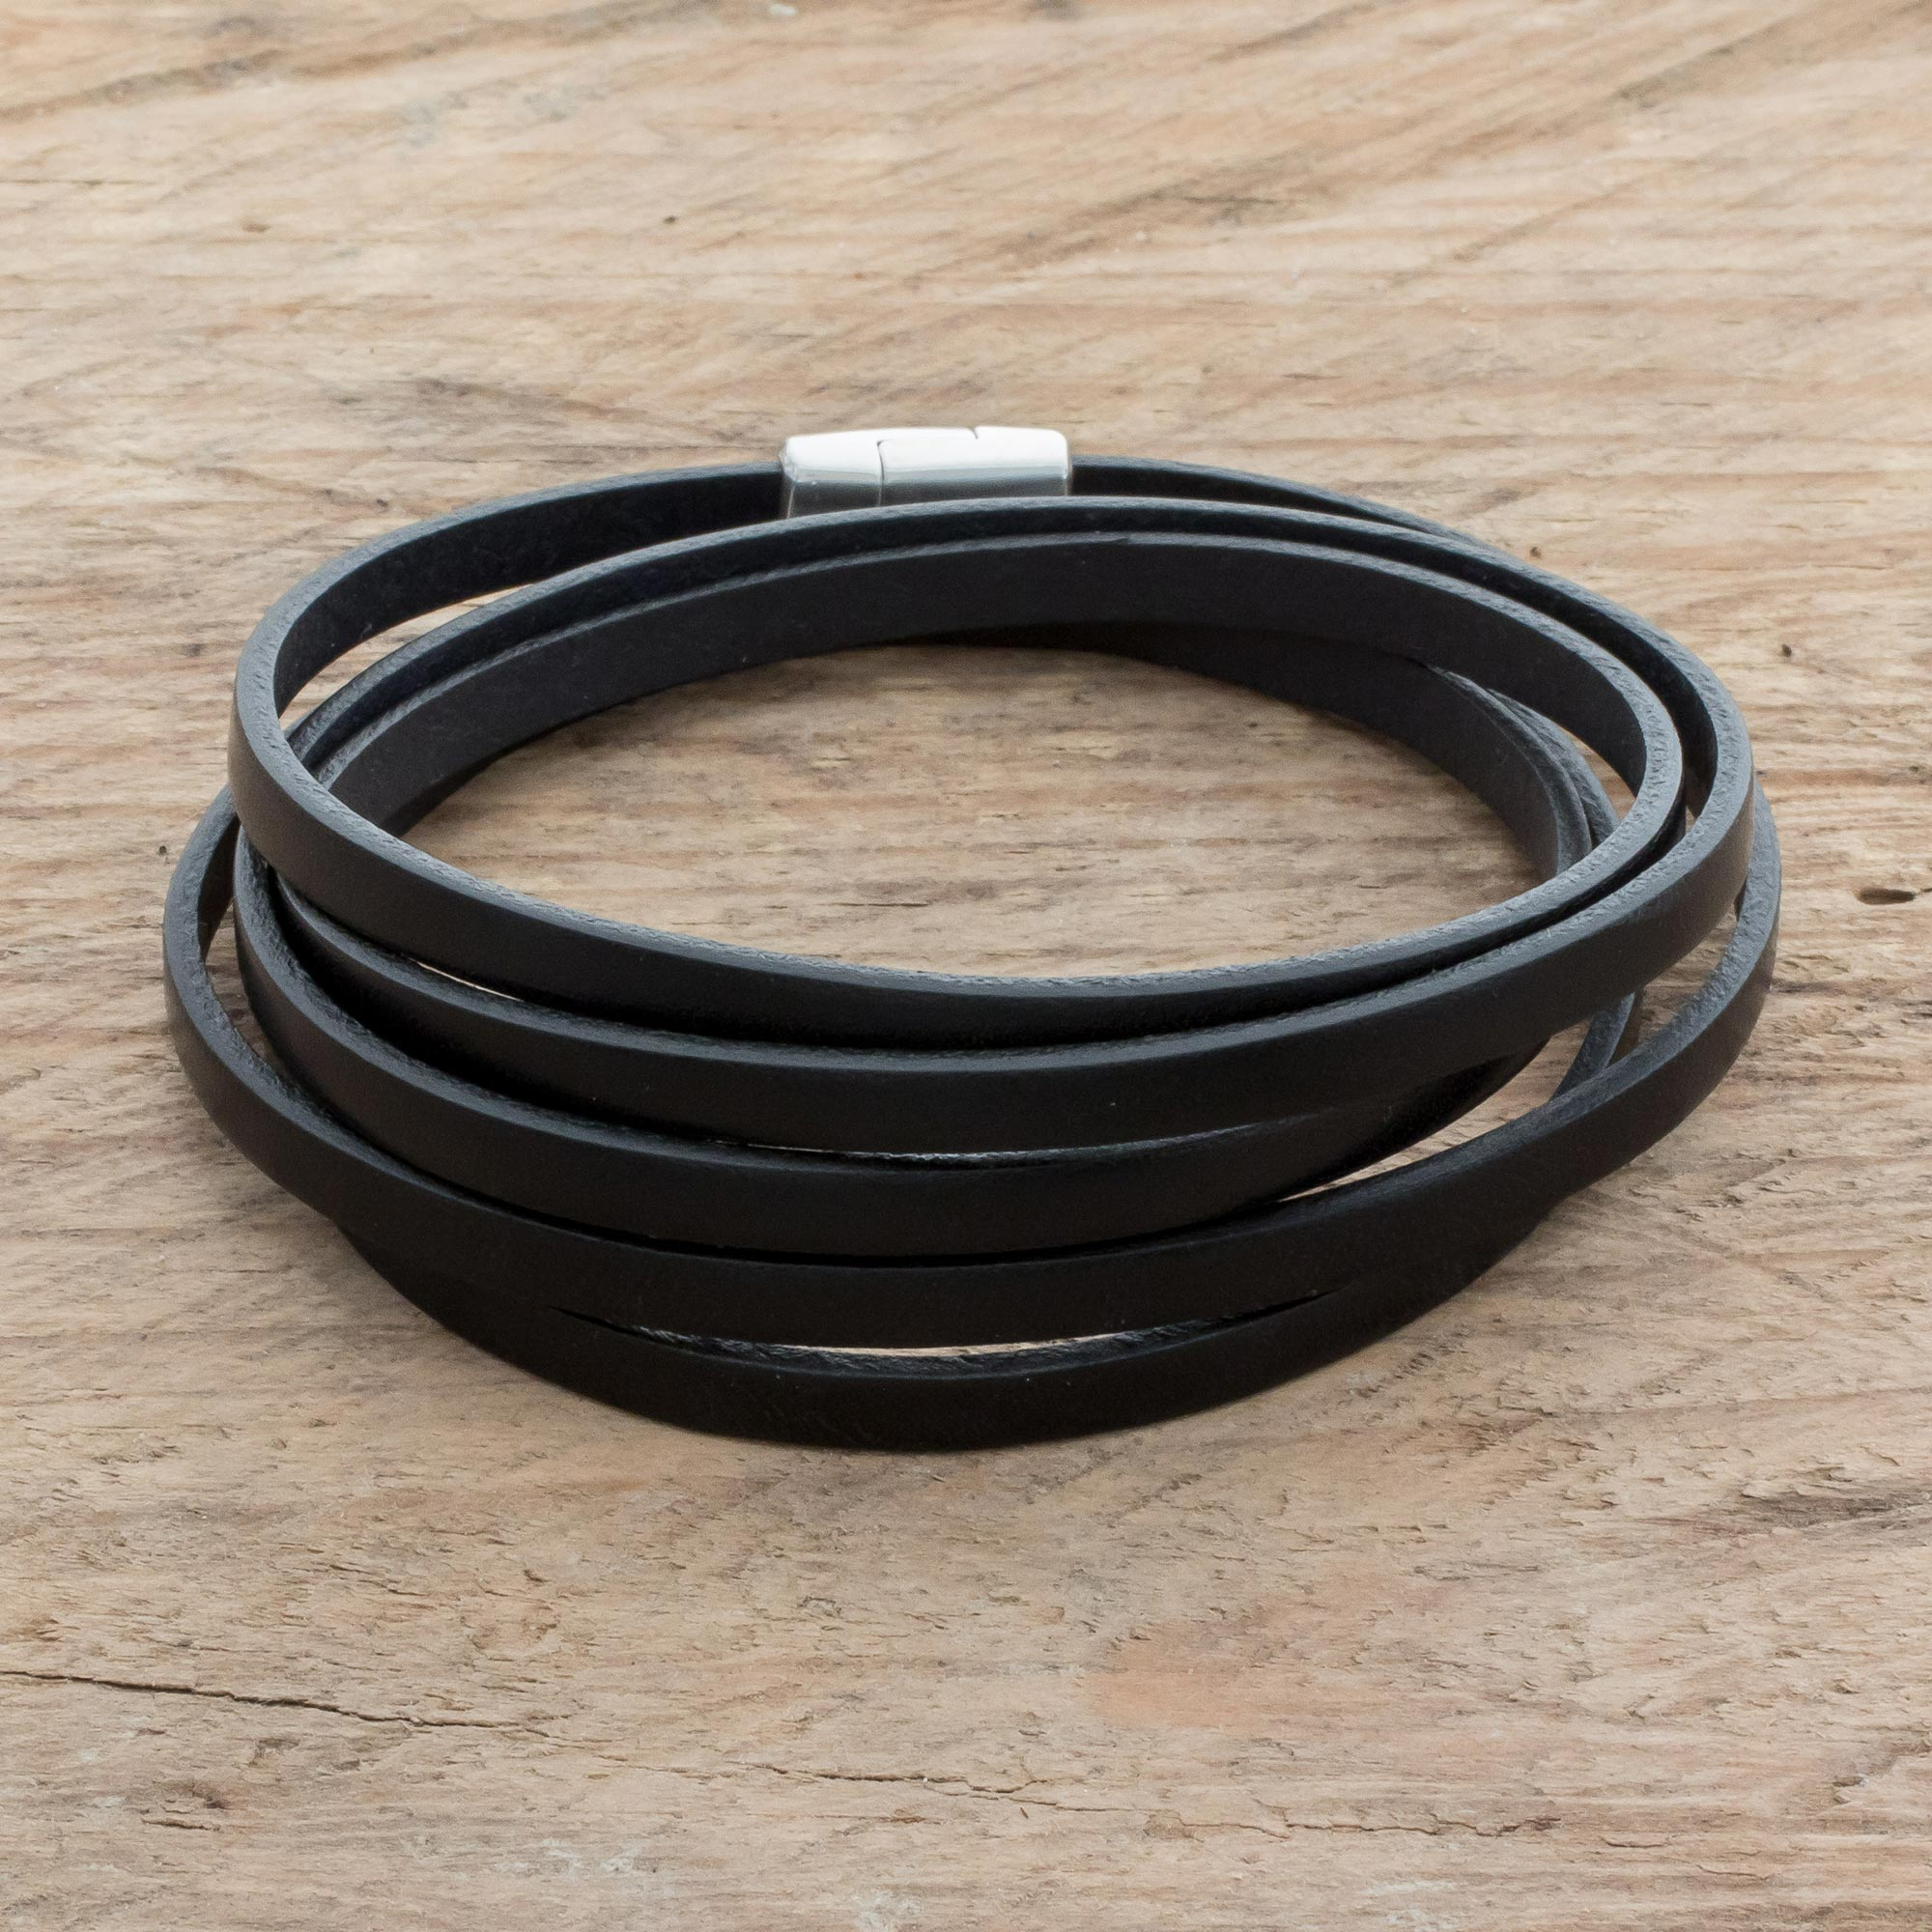 Initial Mens Black leather Bracelet - Personalized